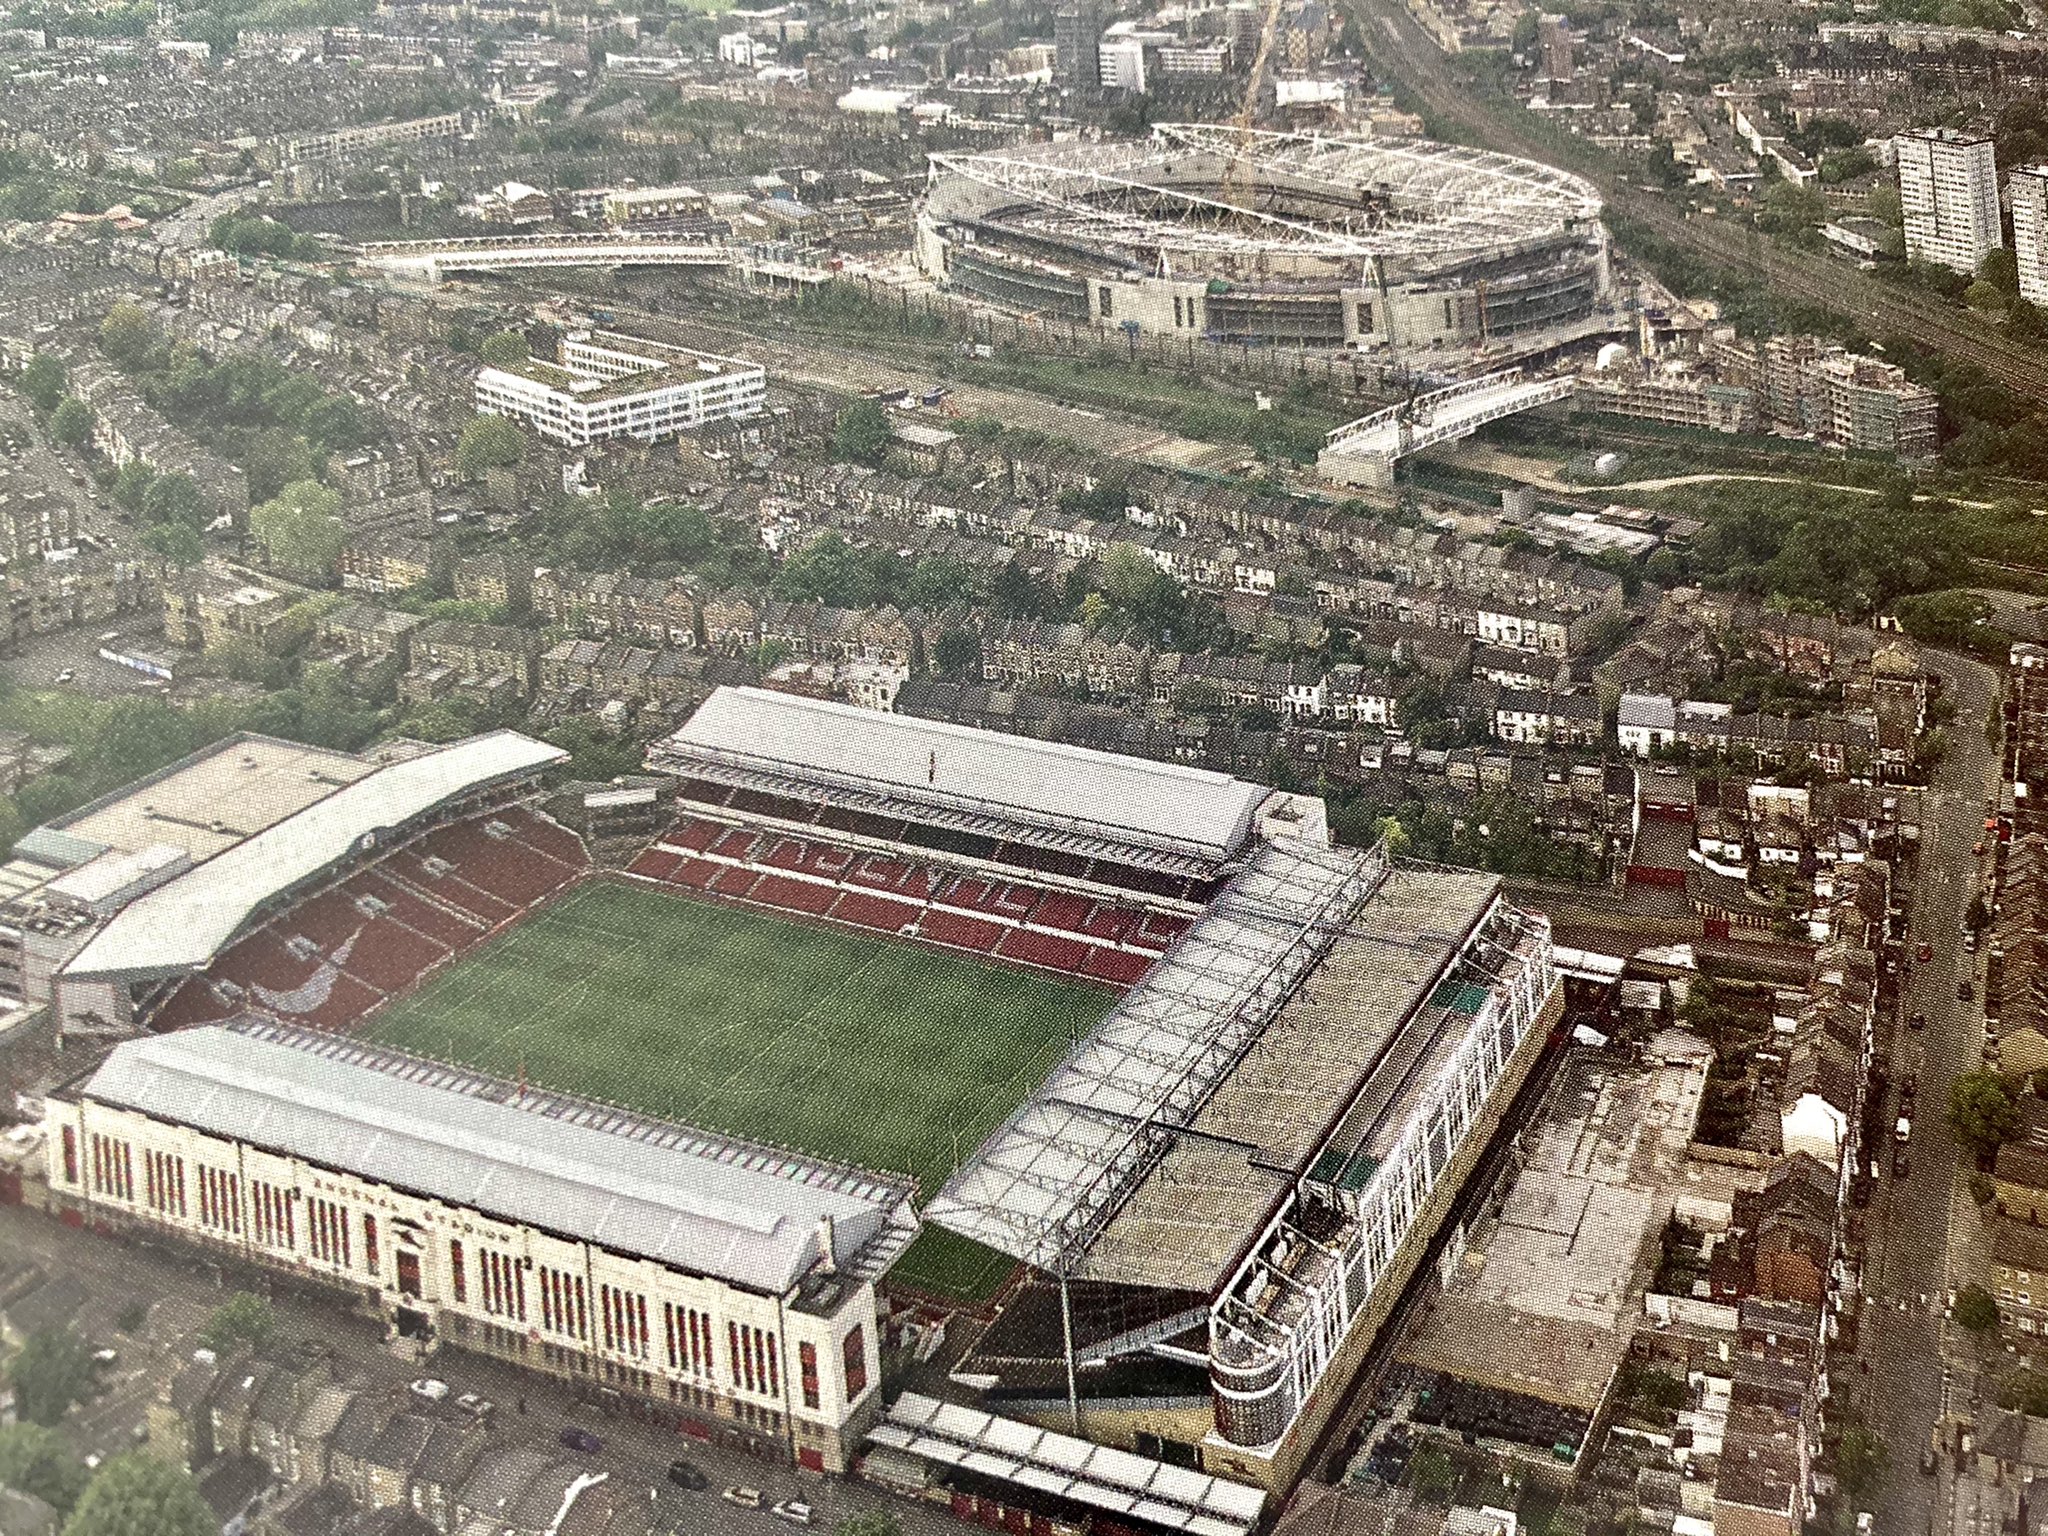 Richard a Twitter: In the forefront Highbury Stadium home of The Arsenal for 93 years the other stadium is the Emirates where The Arsenal now play. #arsenal